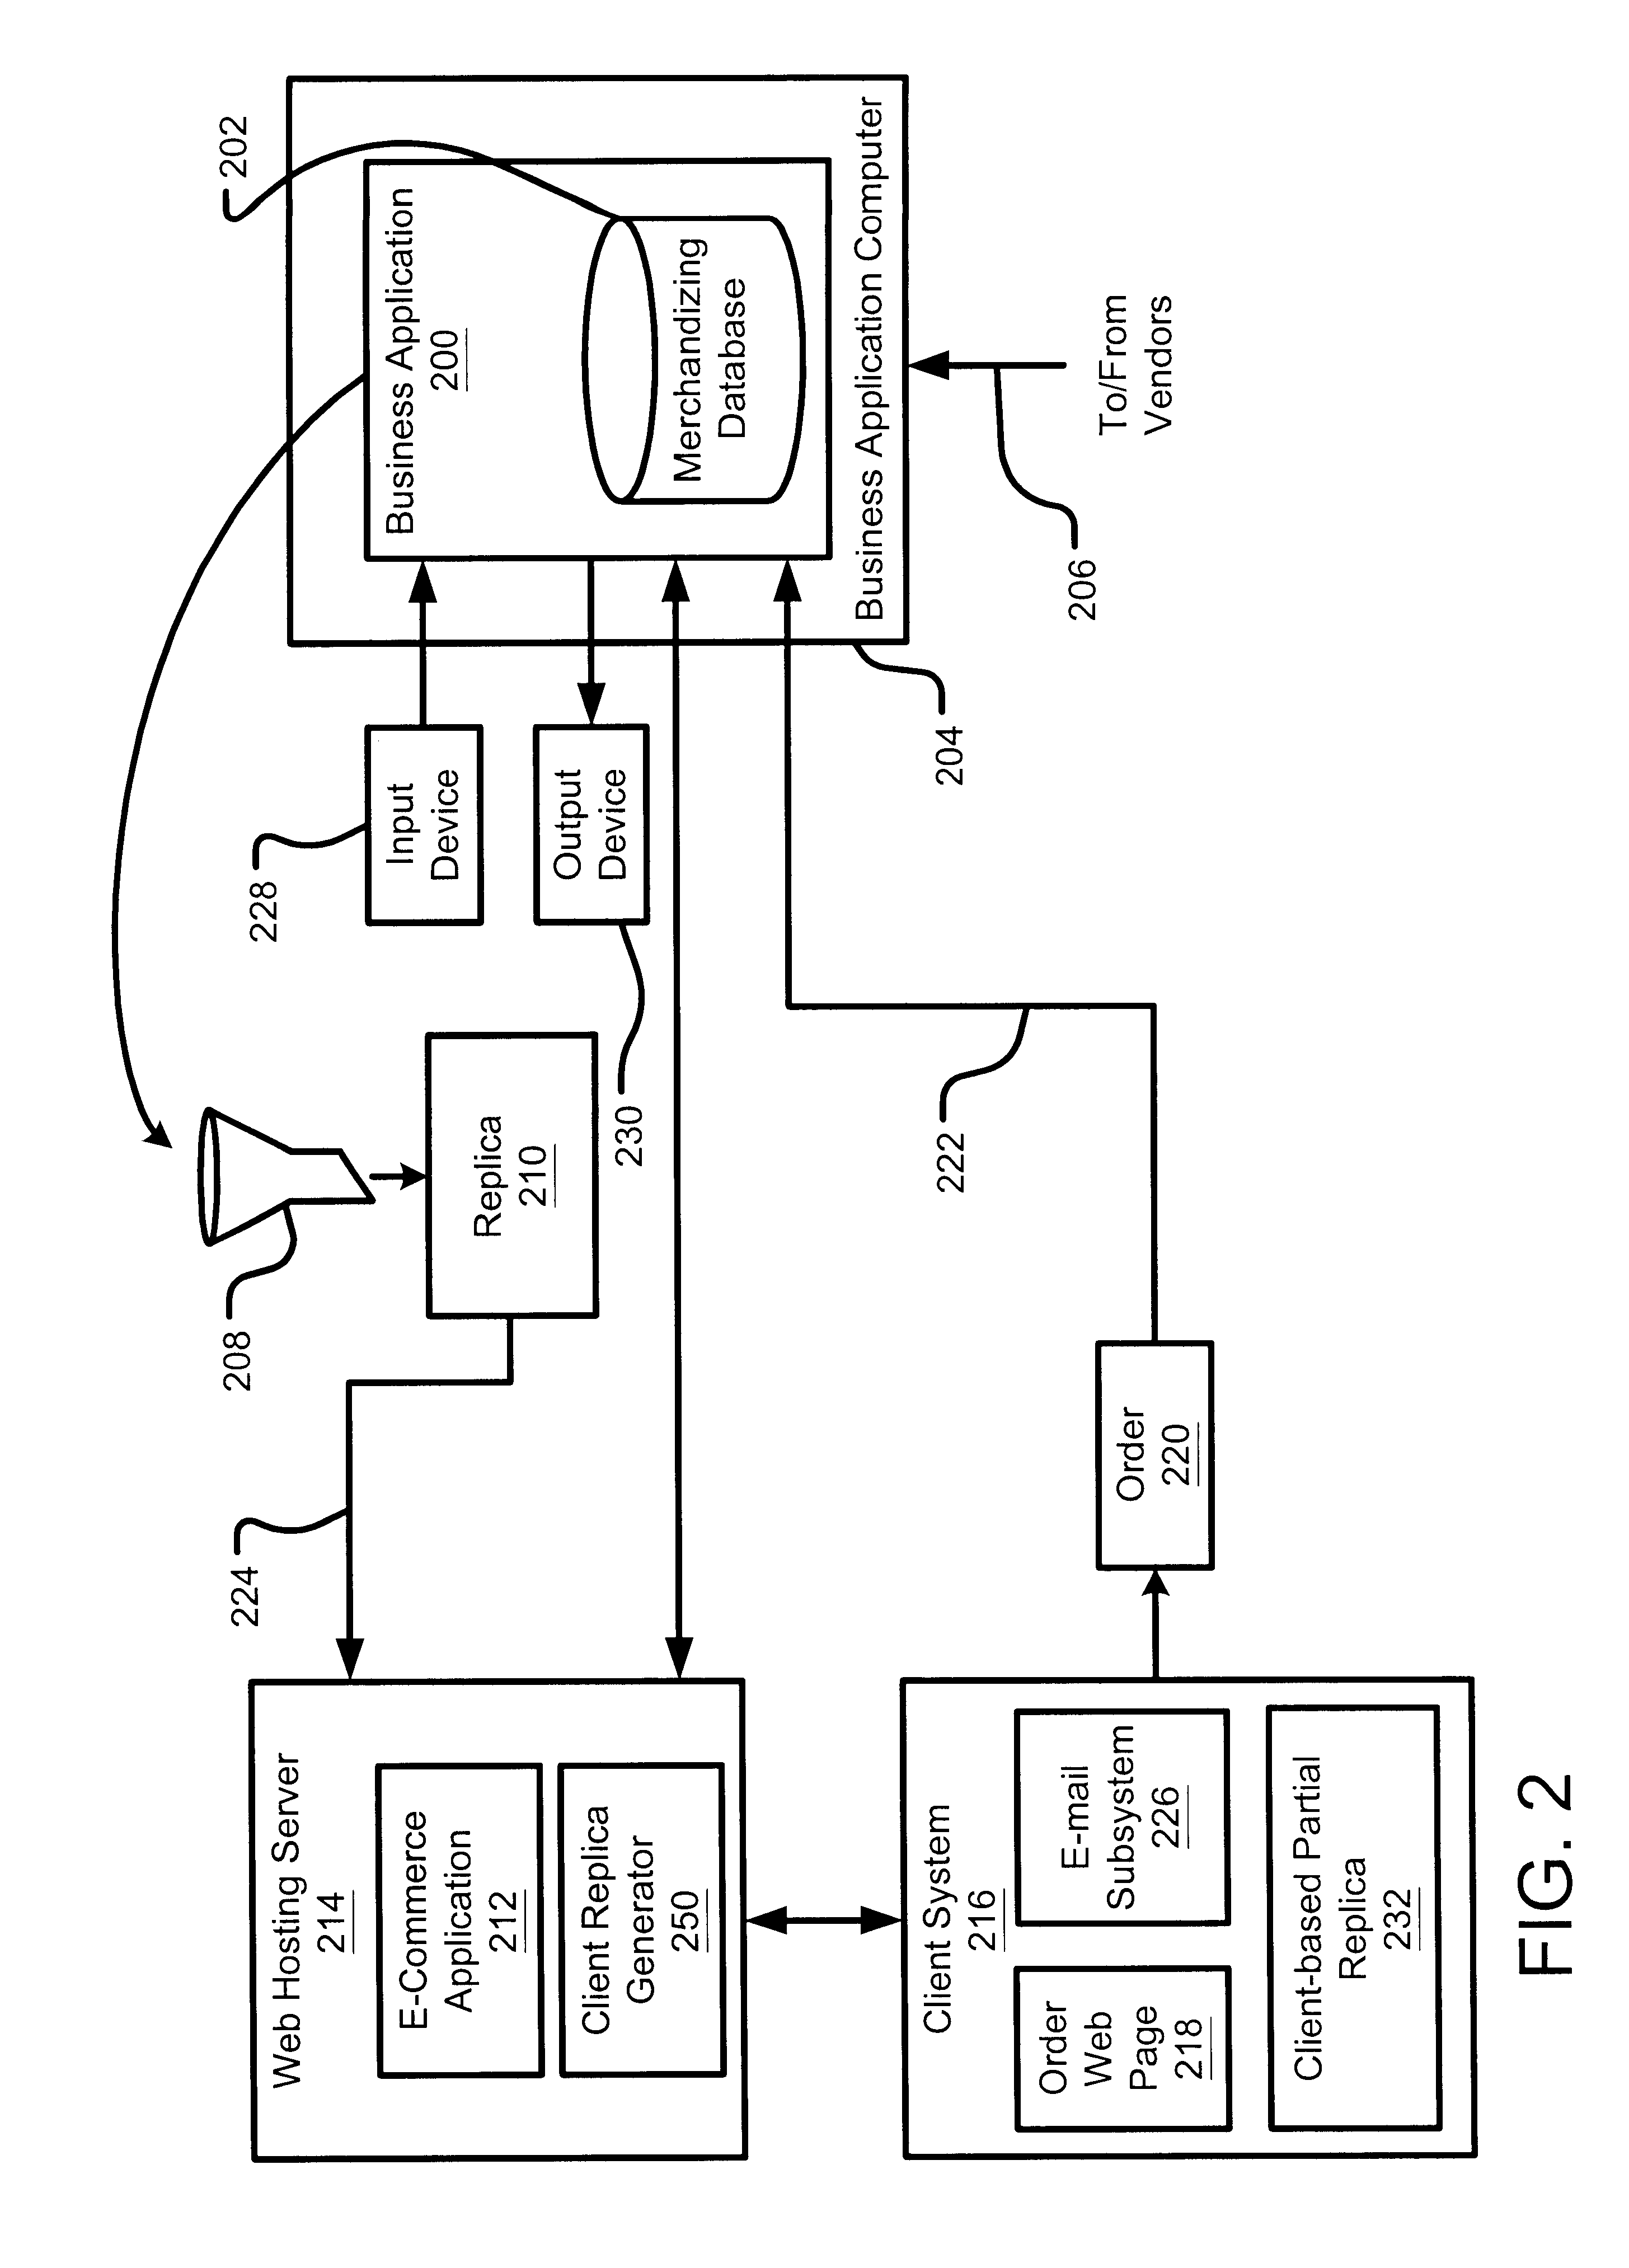 Merchandising system method, and program product utilizing an intermittent network connection